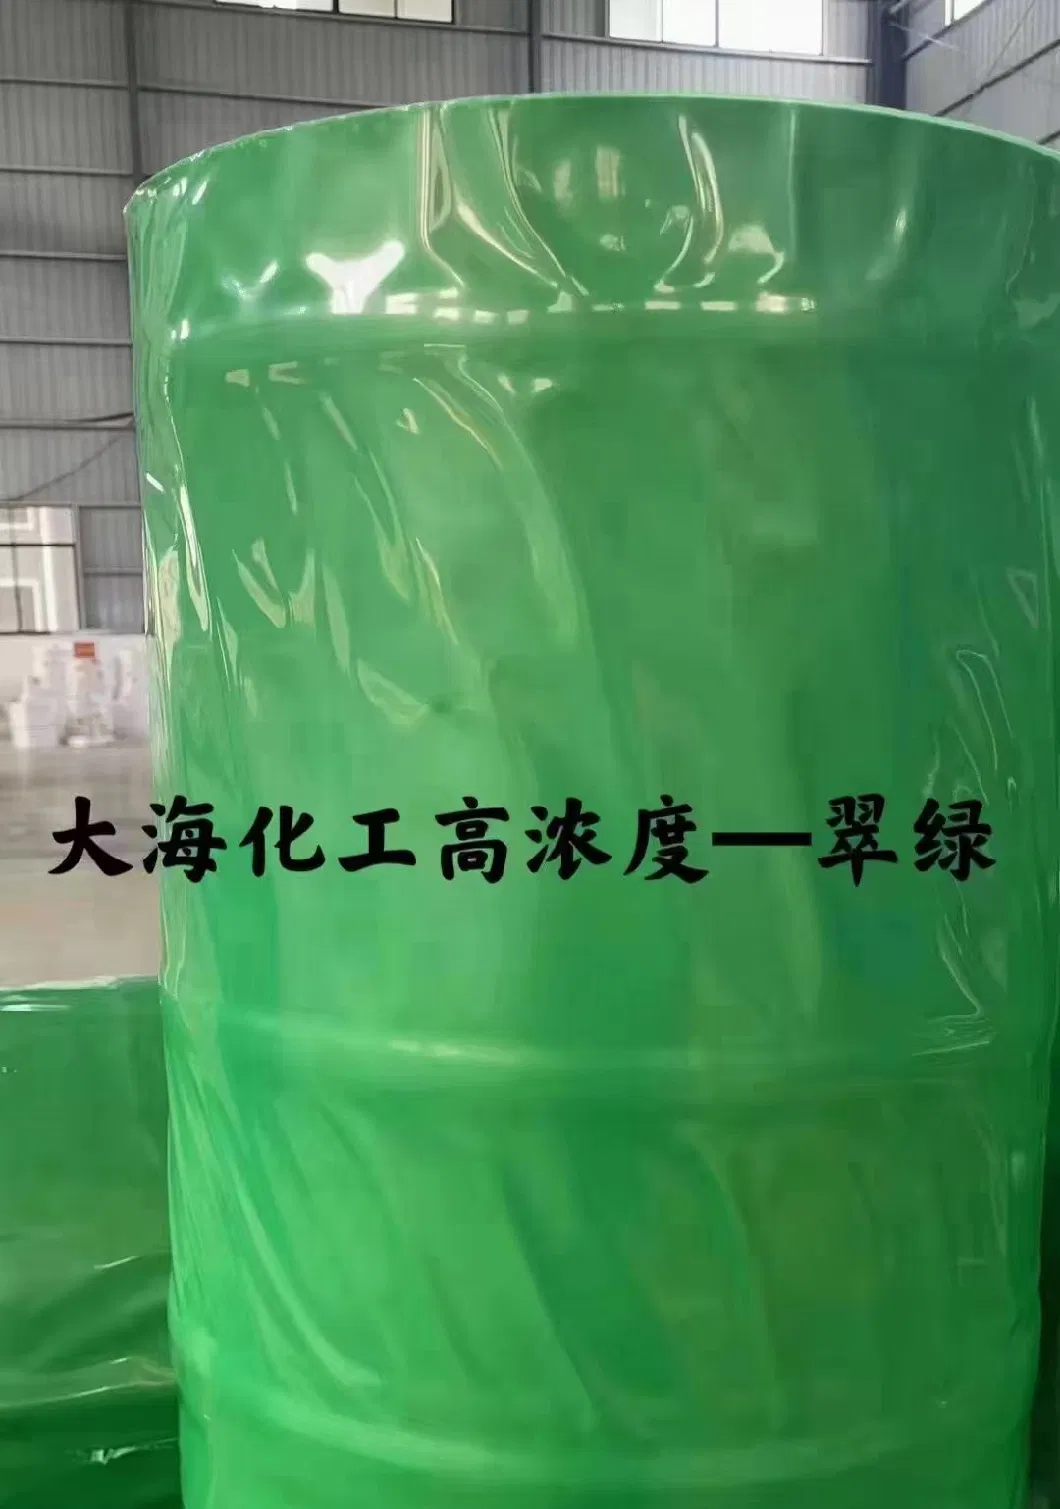 High Concentration Pipes/Household Appliances/Toys/Textile White Masterbatch Plastic Resin Particles